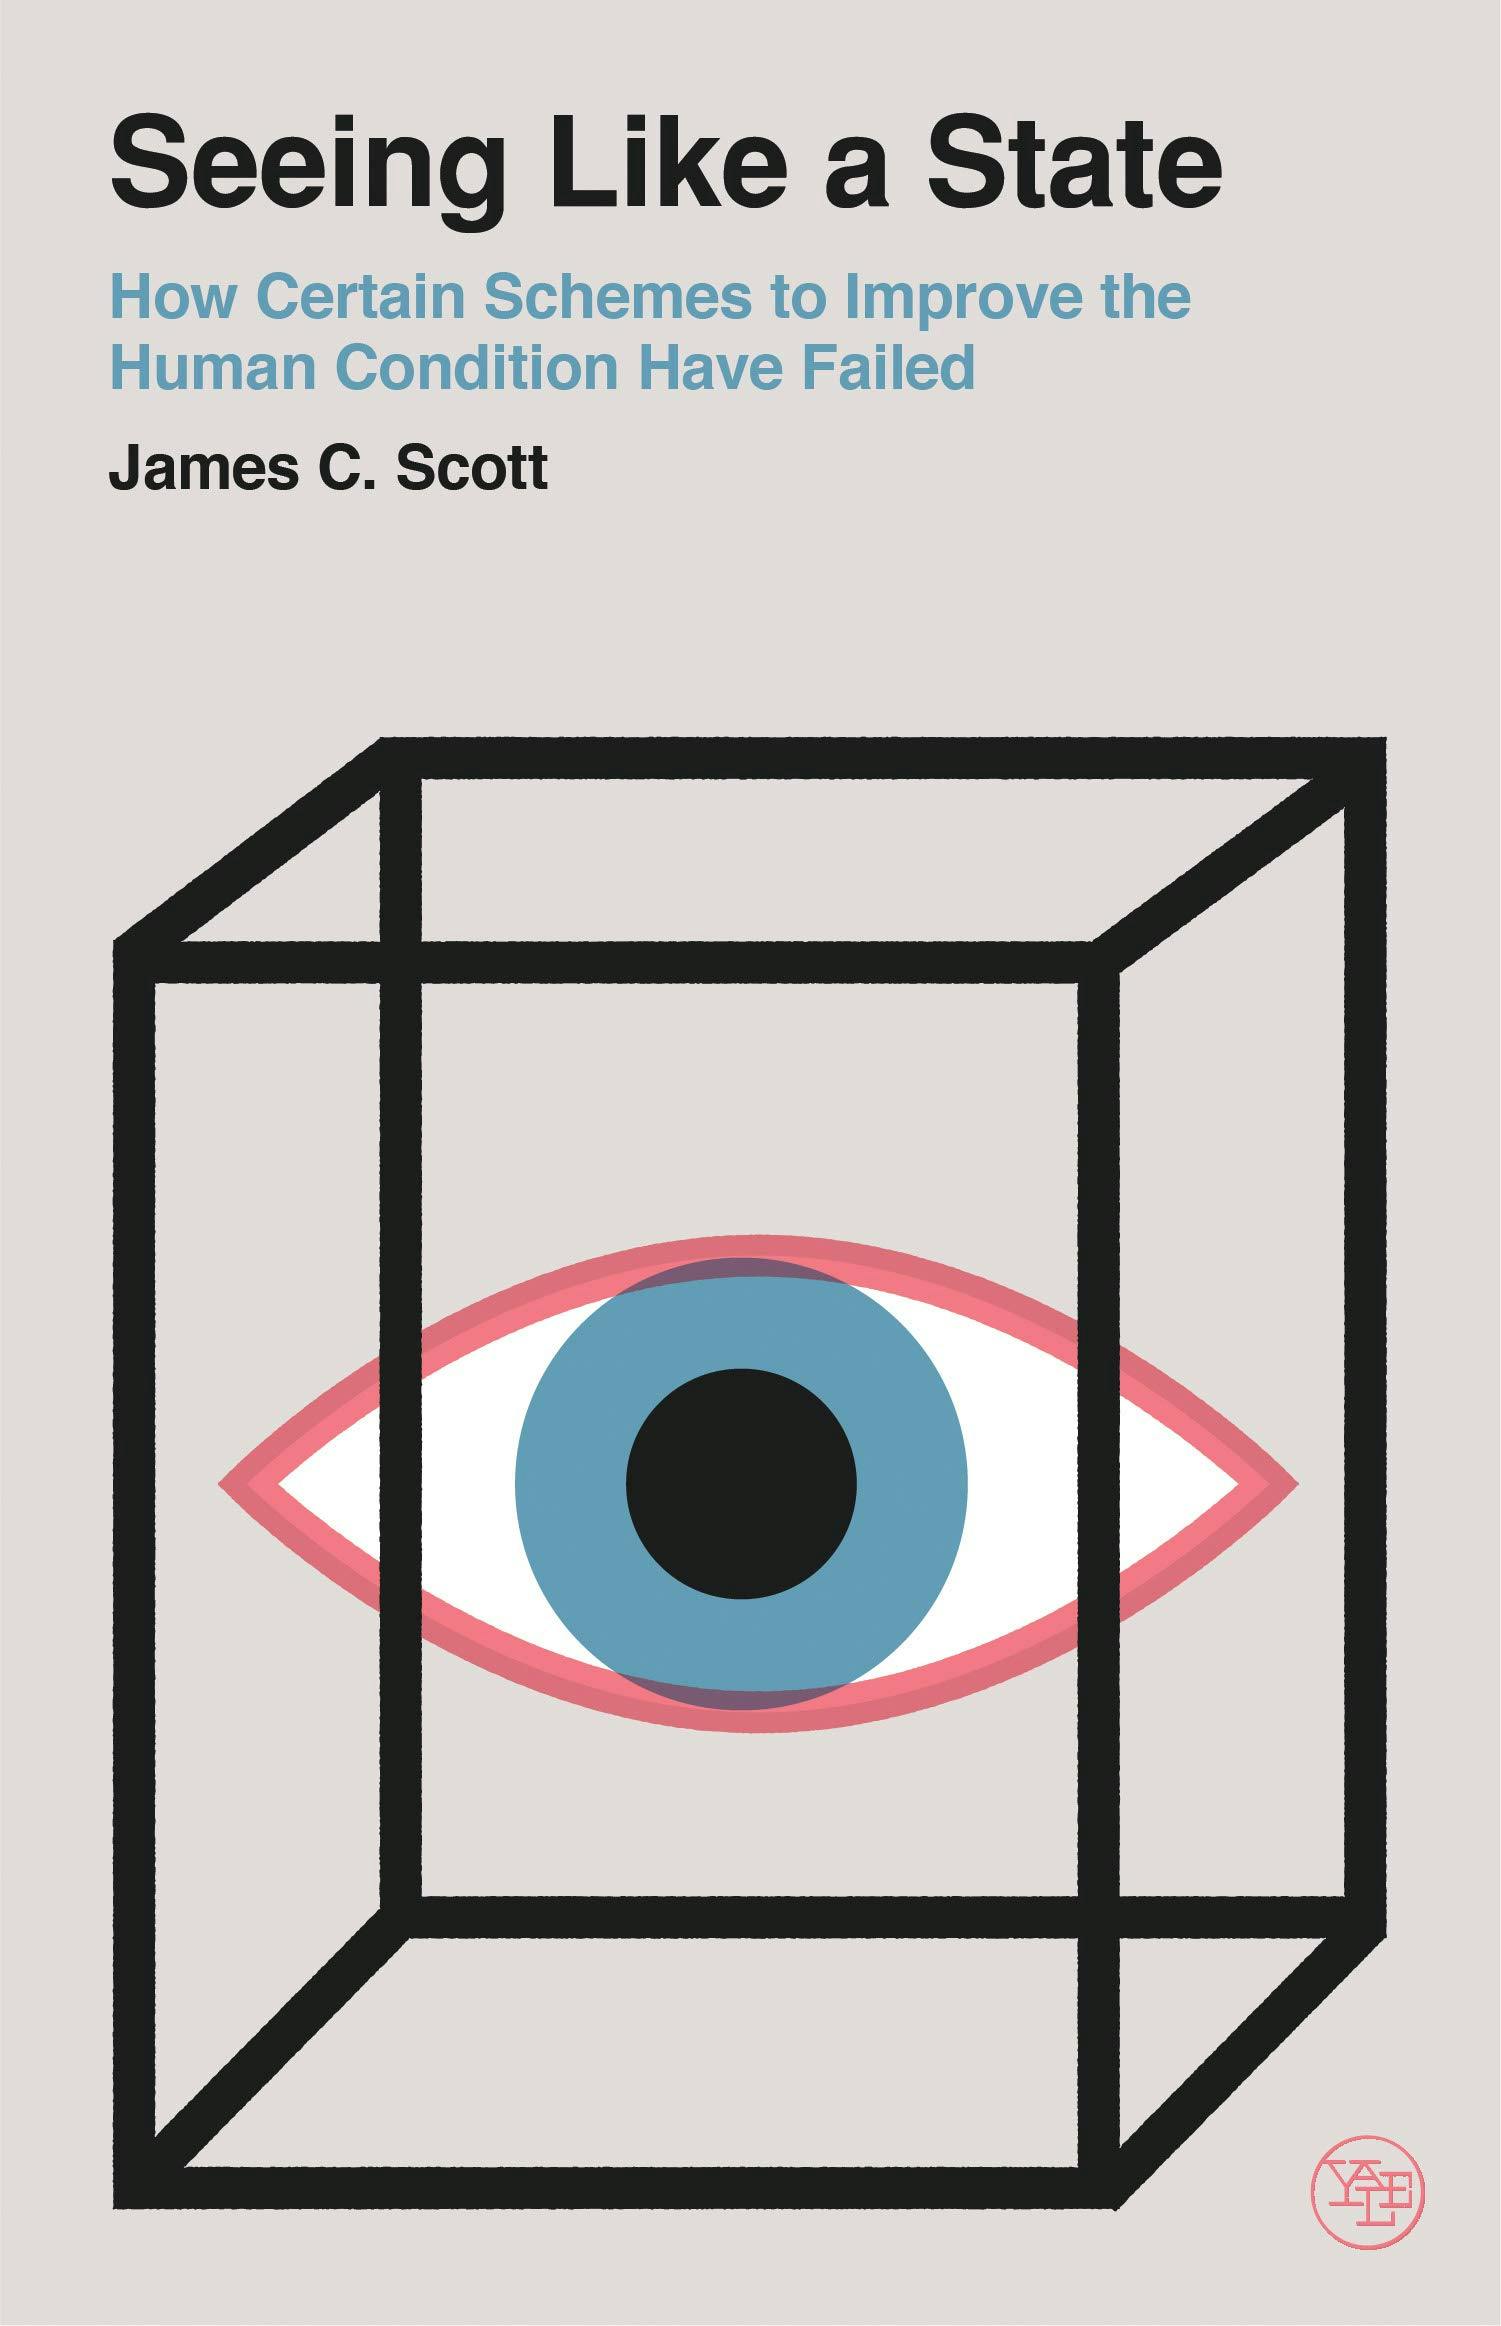 The media cover for “Seeing Like a State” by James C. Scott